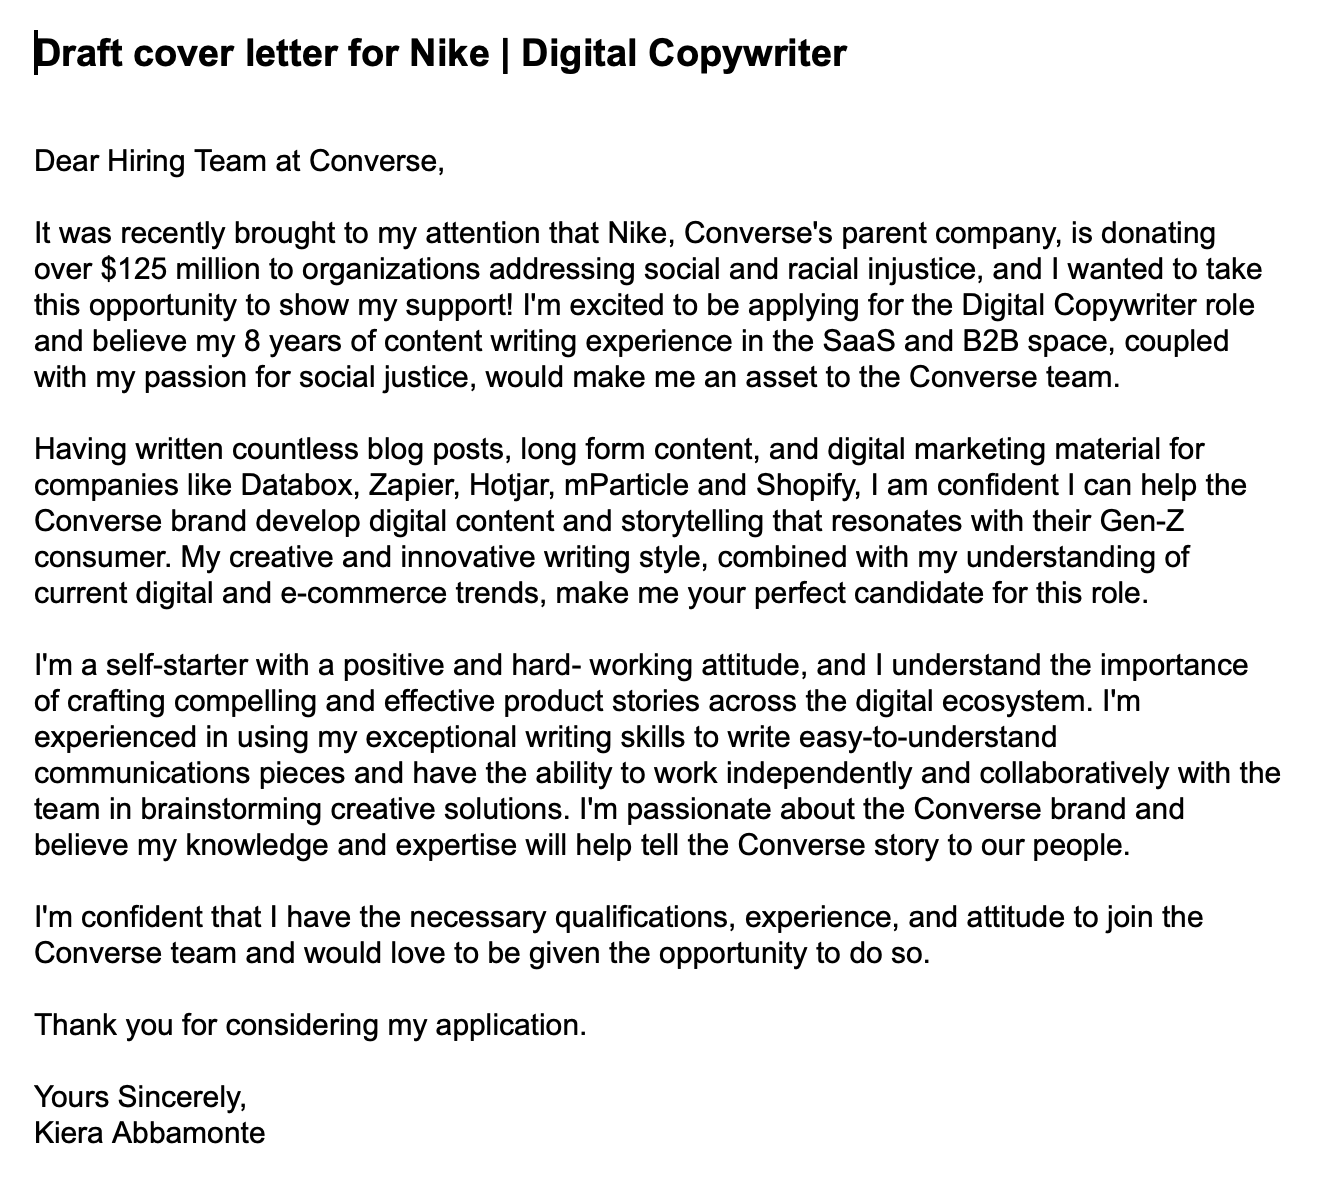 An example cover letter from CoverDoc.ai